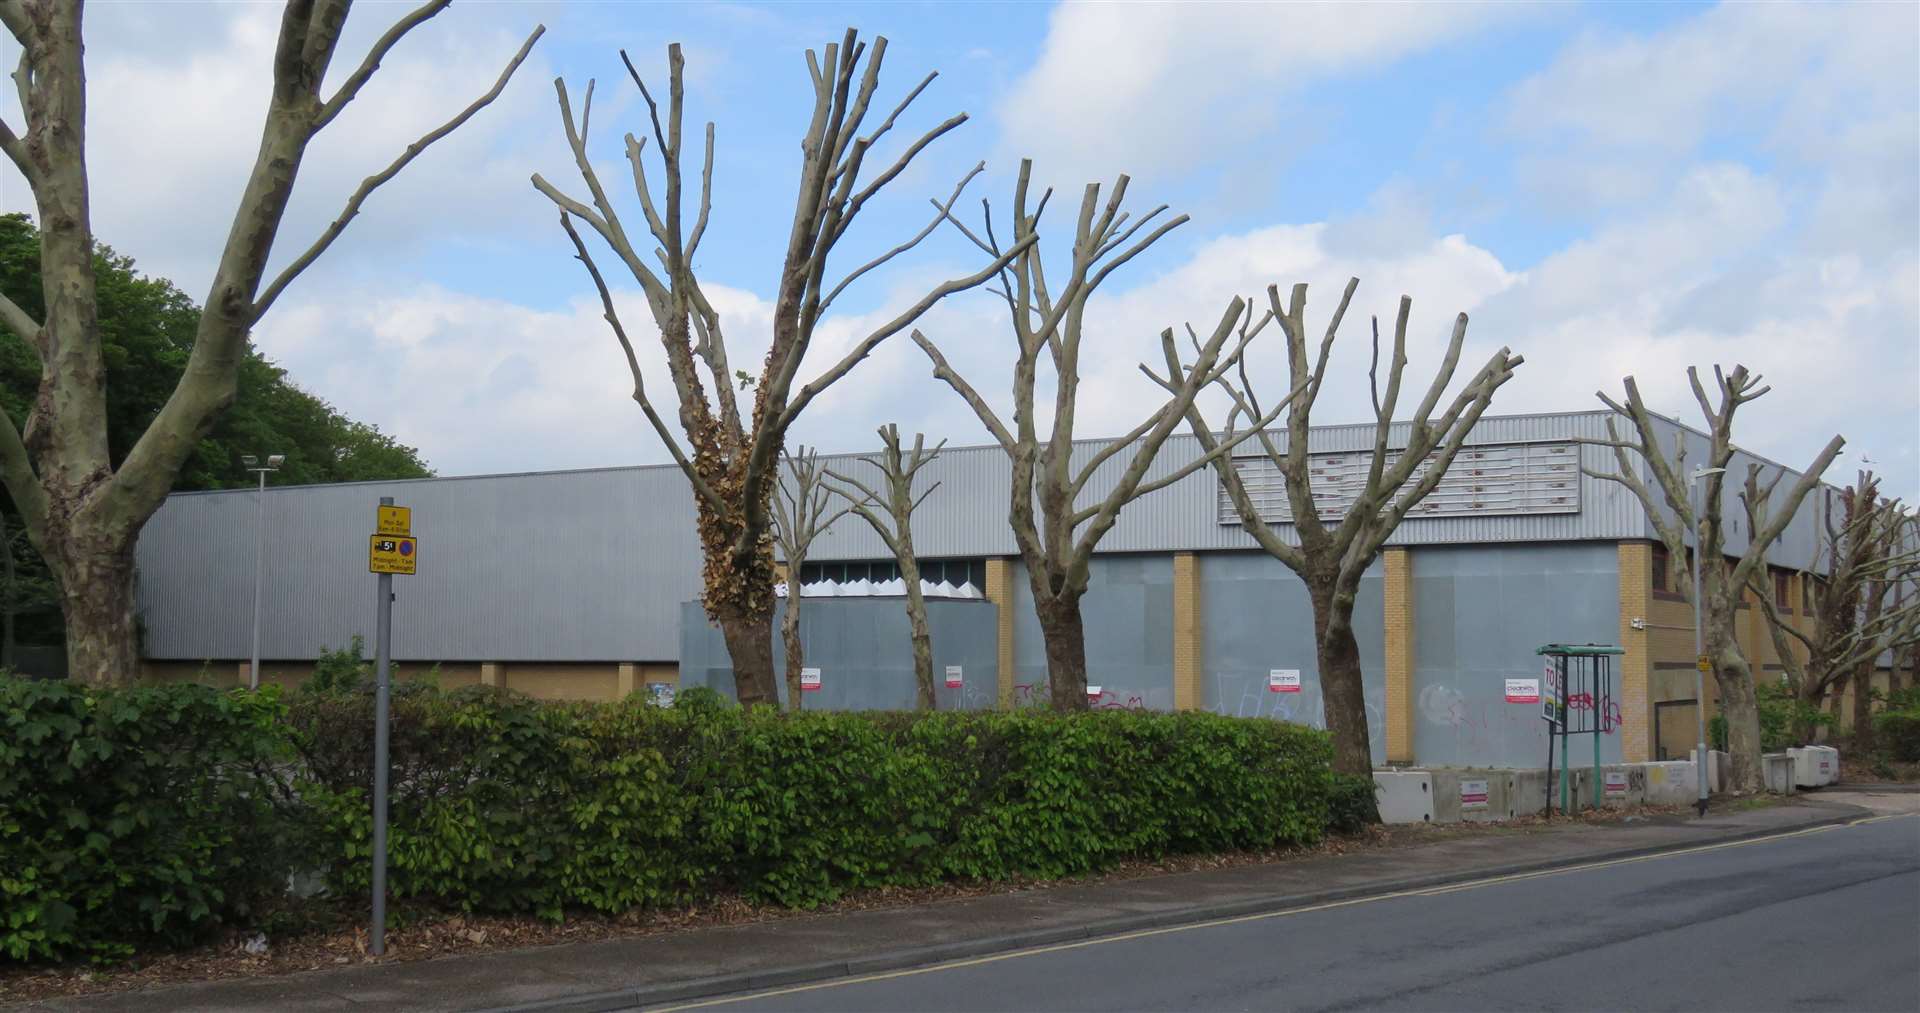 The trees earmarked for felling have recently been cut back by the council